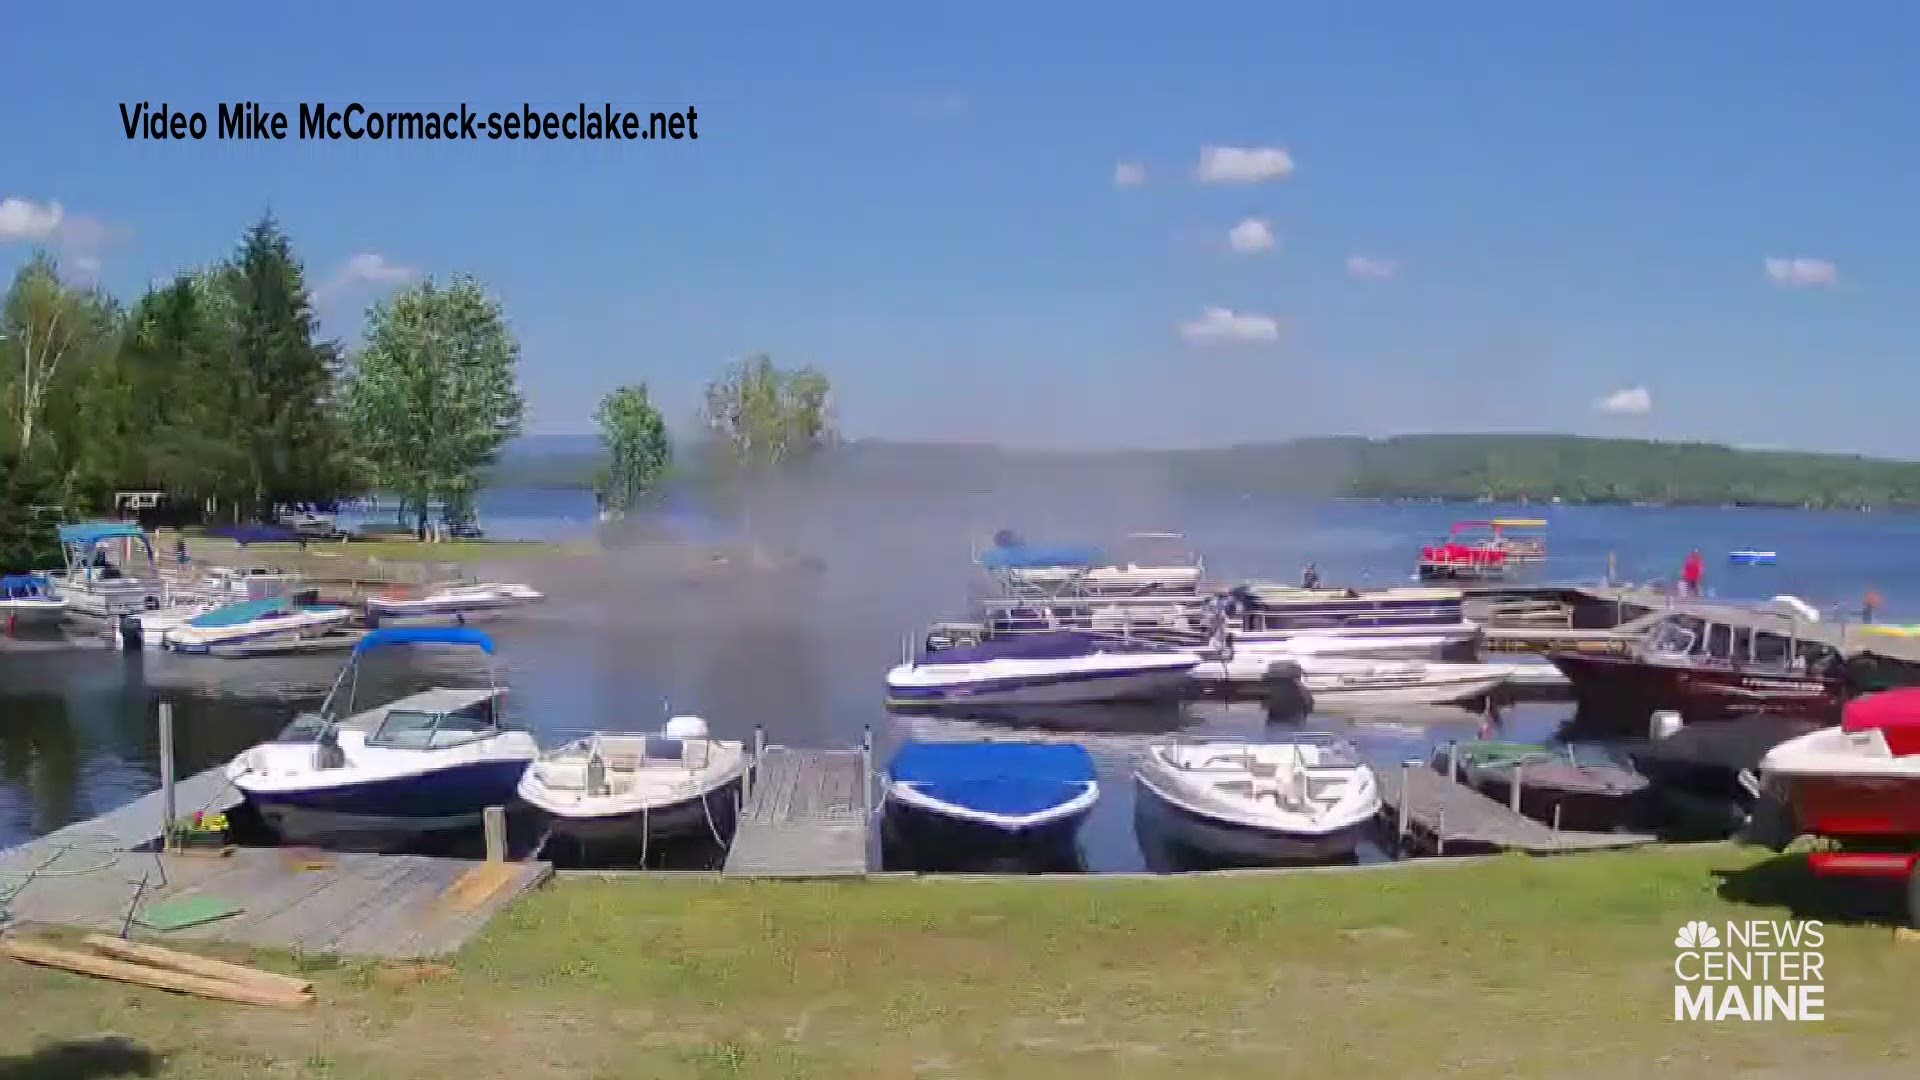 A boat was destroyed by fire at Merrill’s Landing on Sebec lake Tuesday.